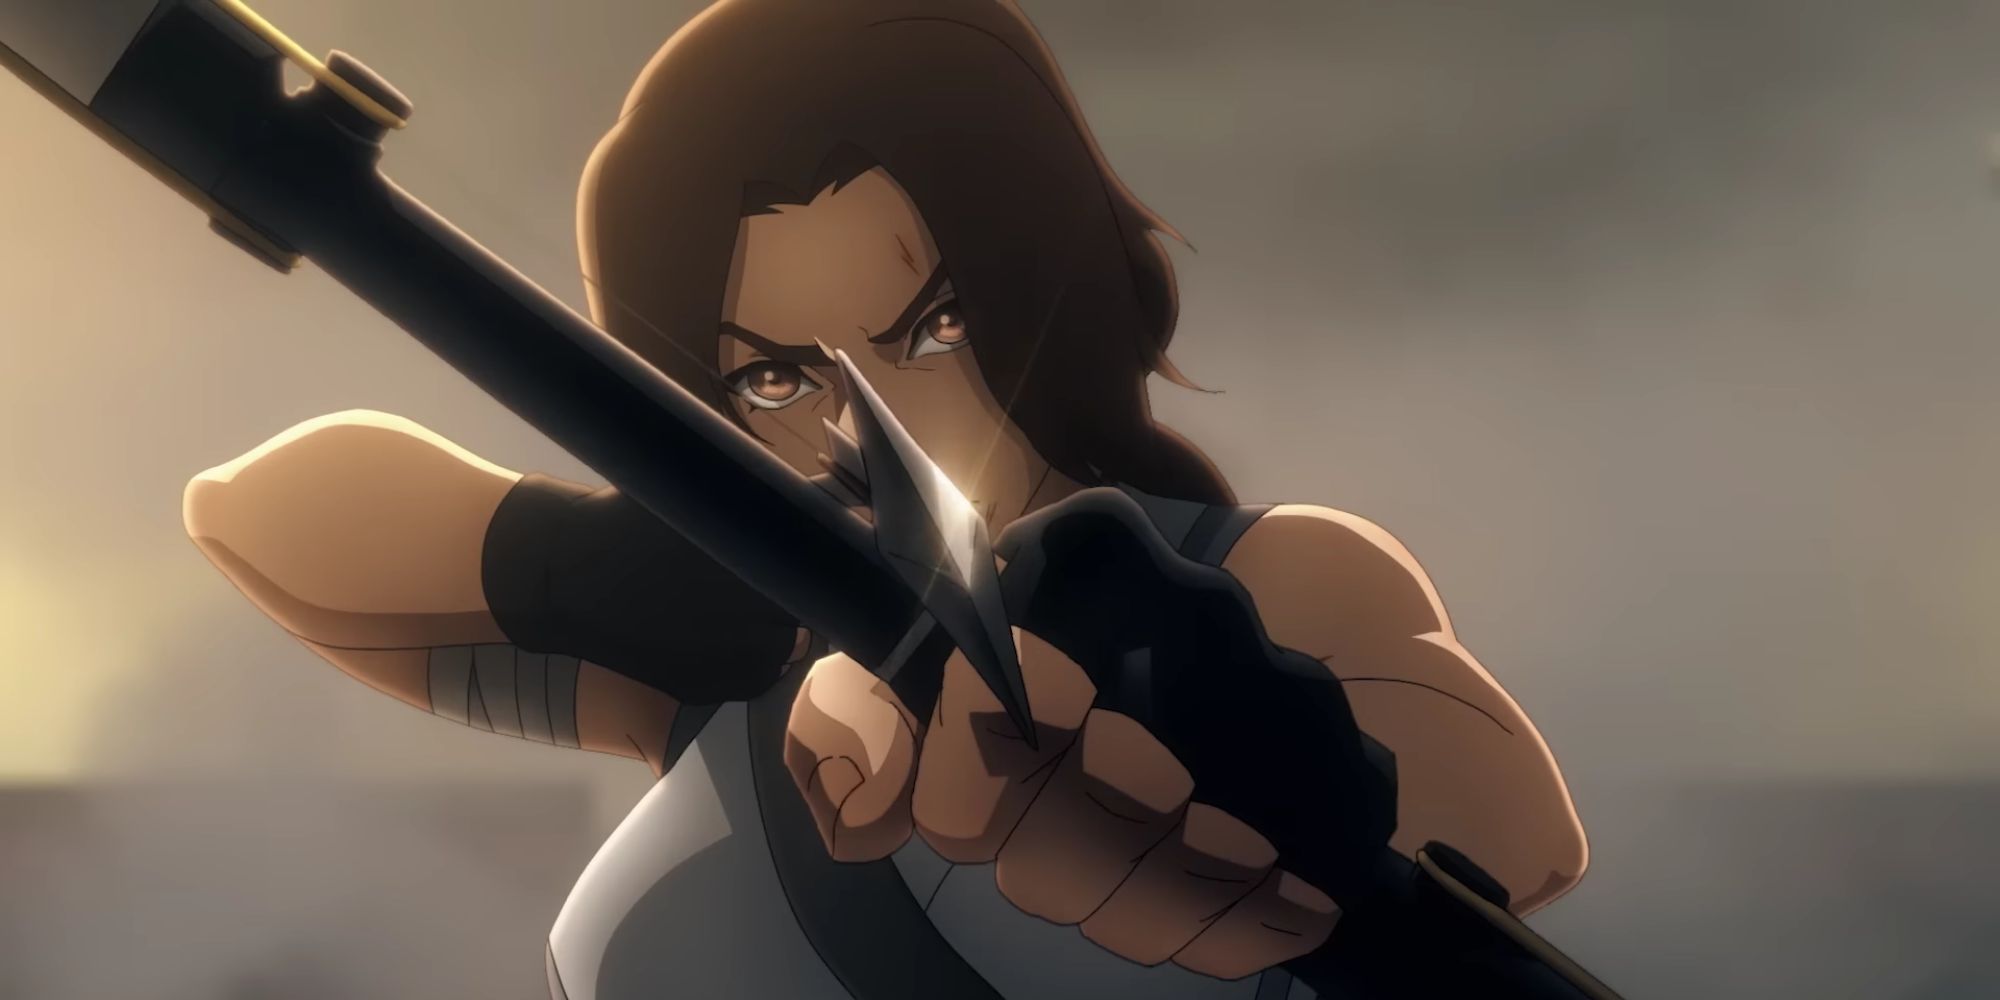 Lara Croft pointing a bow and arrow at the camera in the Tomb Raider anime.